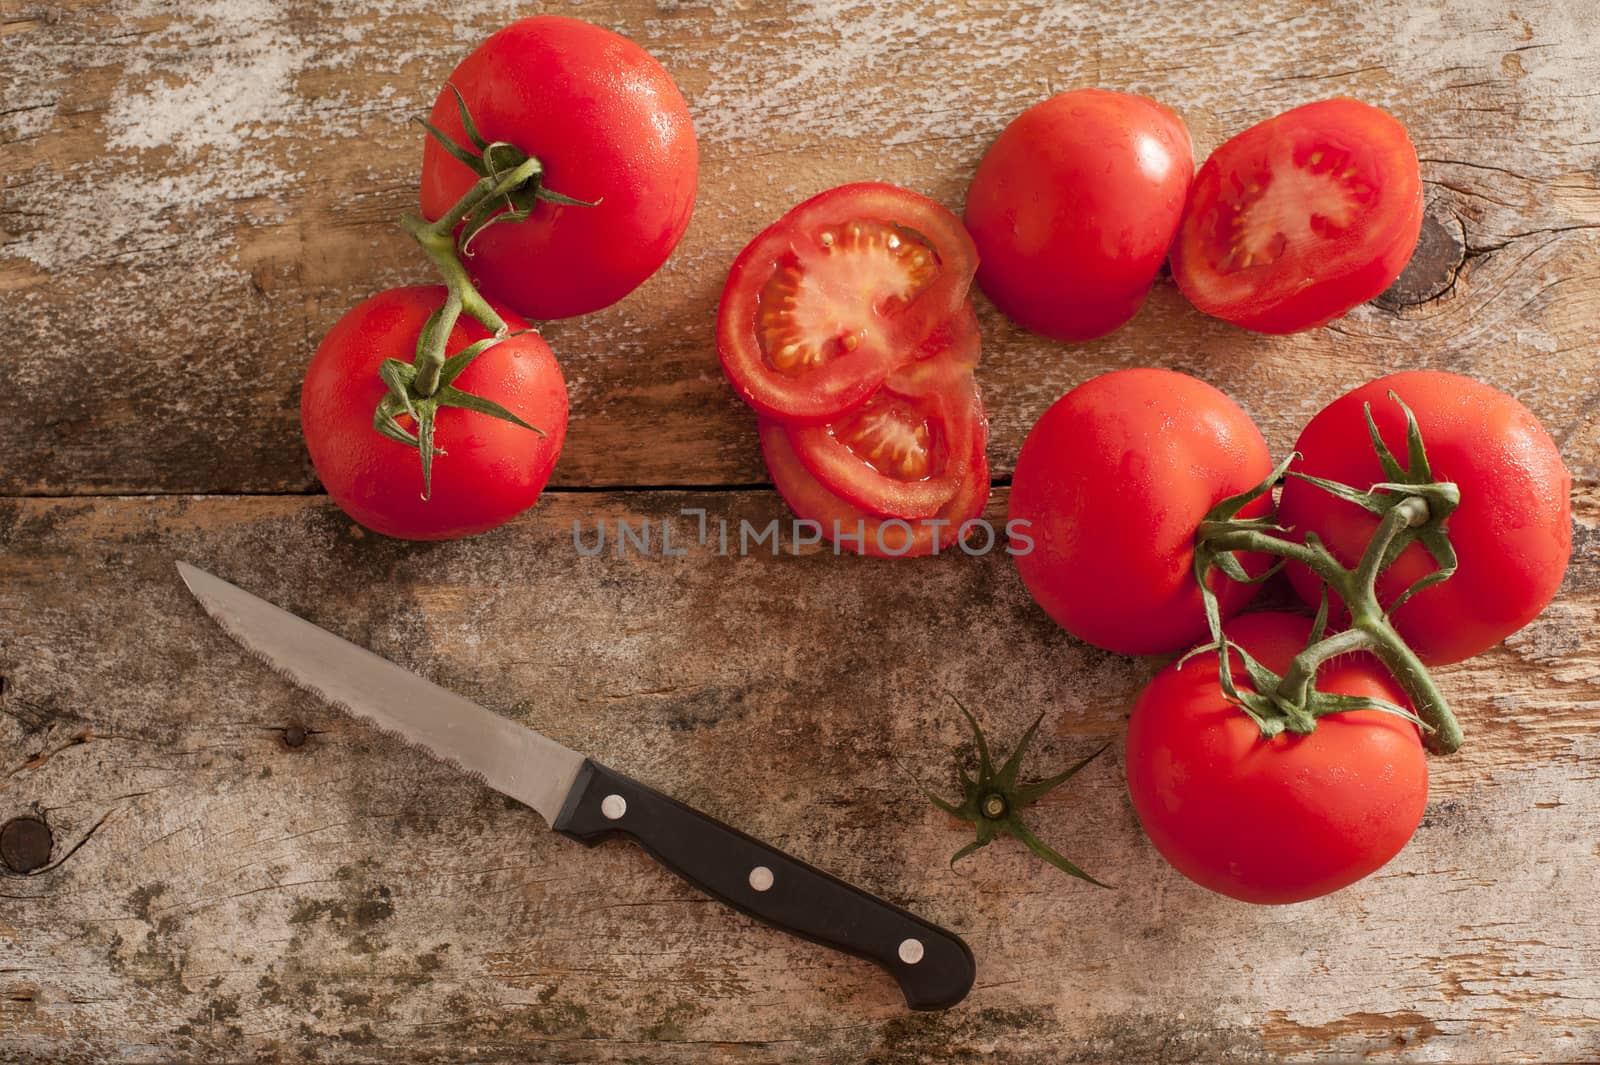 Preparing fresh tomatoes for a salad or cooking with an overhead view of ripe cherry tomatoes and a kitchen knife on an old chopping board